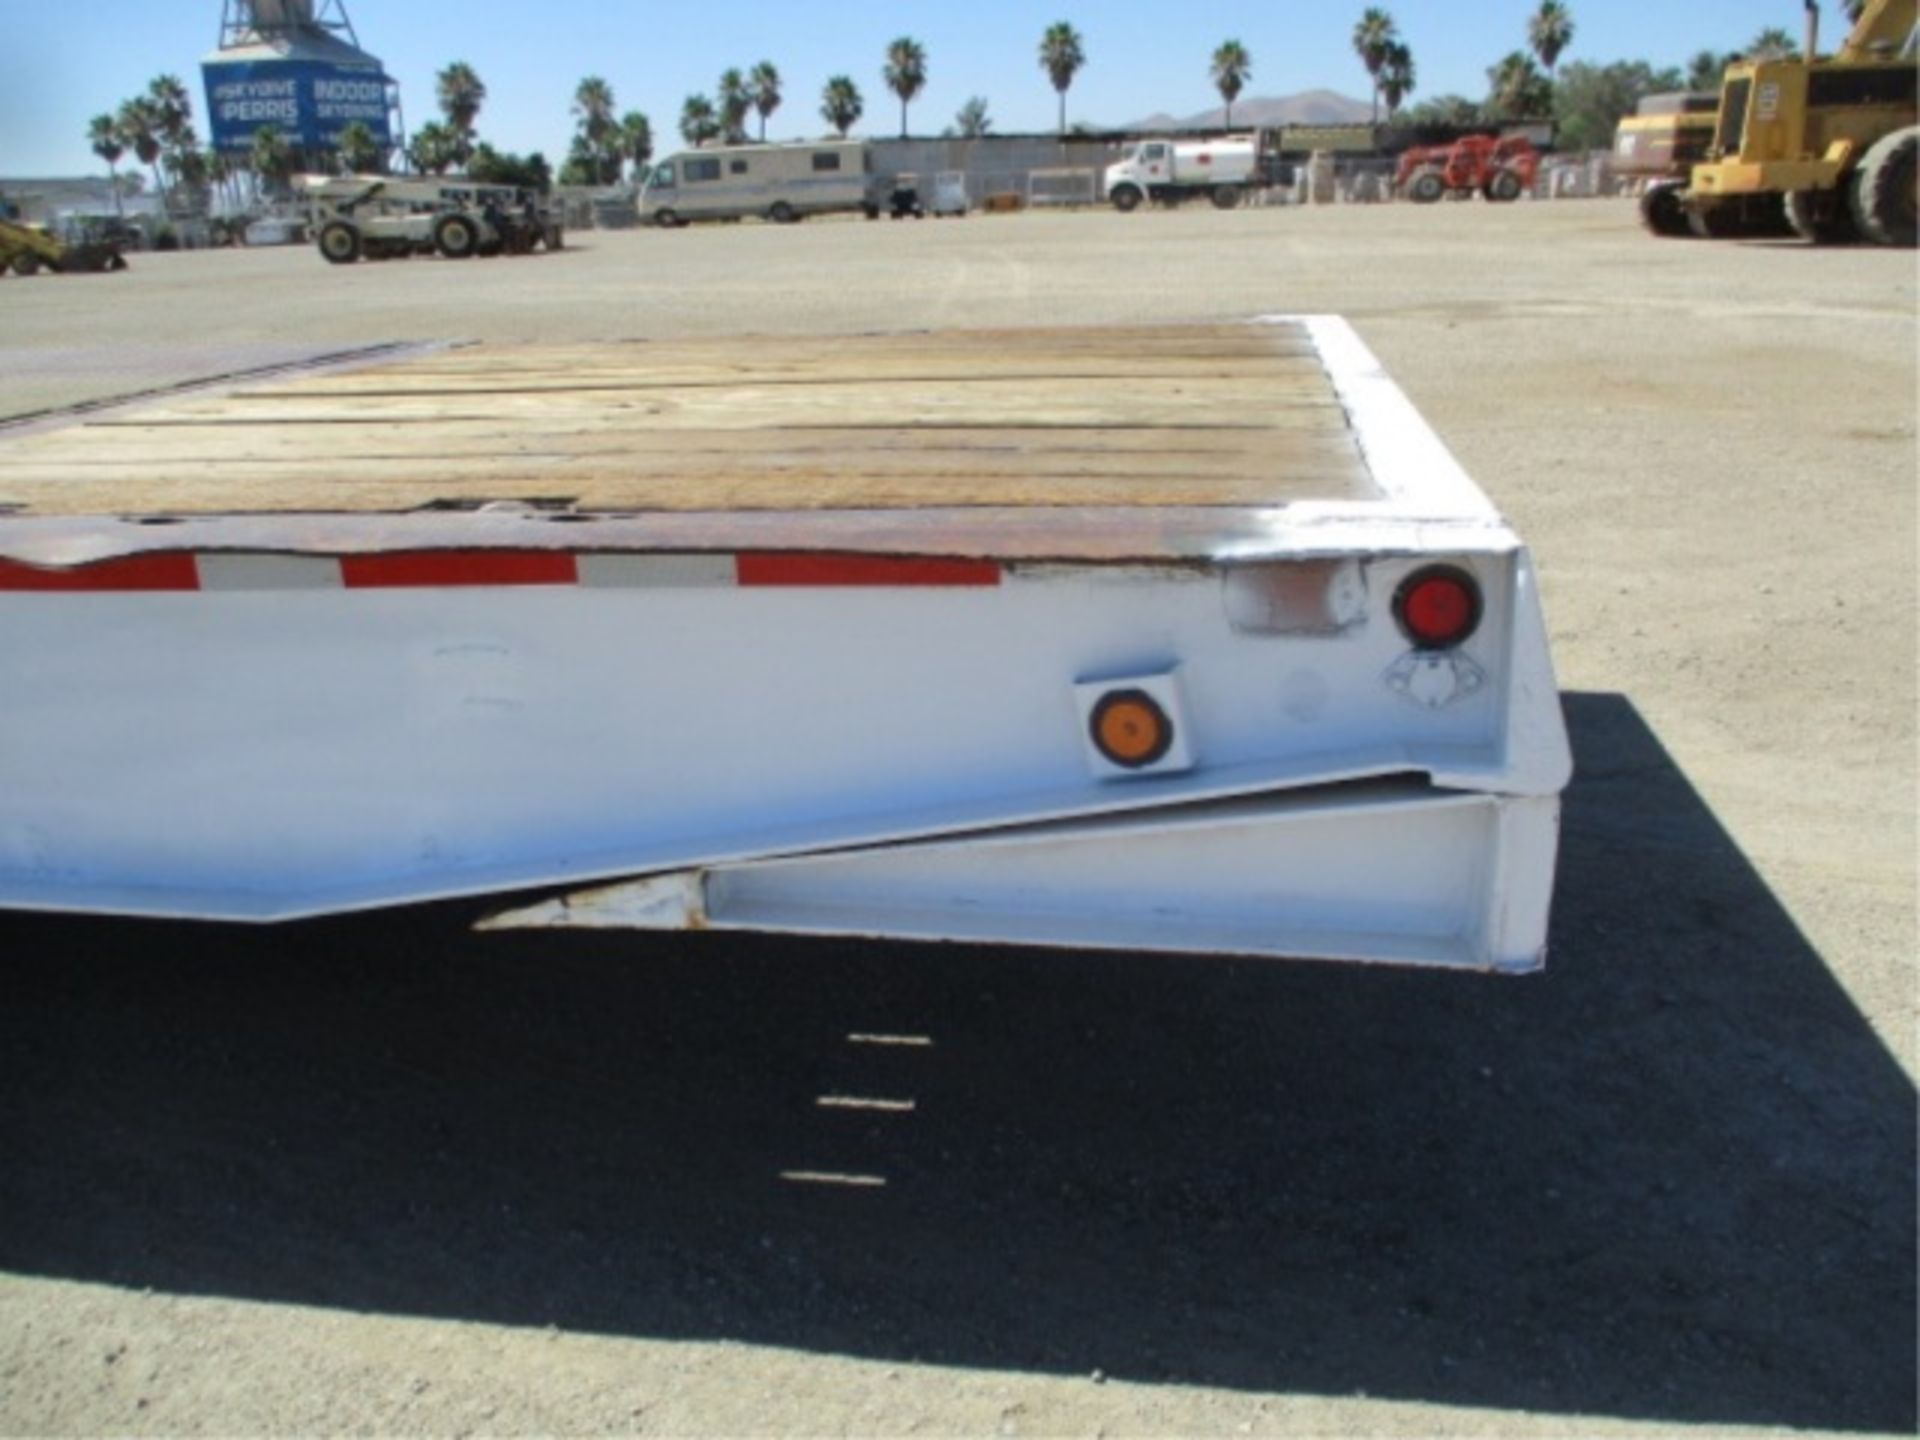 2000 Trail King TK70HT-482 T/A Equipment Trailer, 48', Wood Deck, Hydraulic Dove Tail, 10' Upper - Image 22 of 88